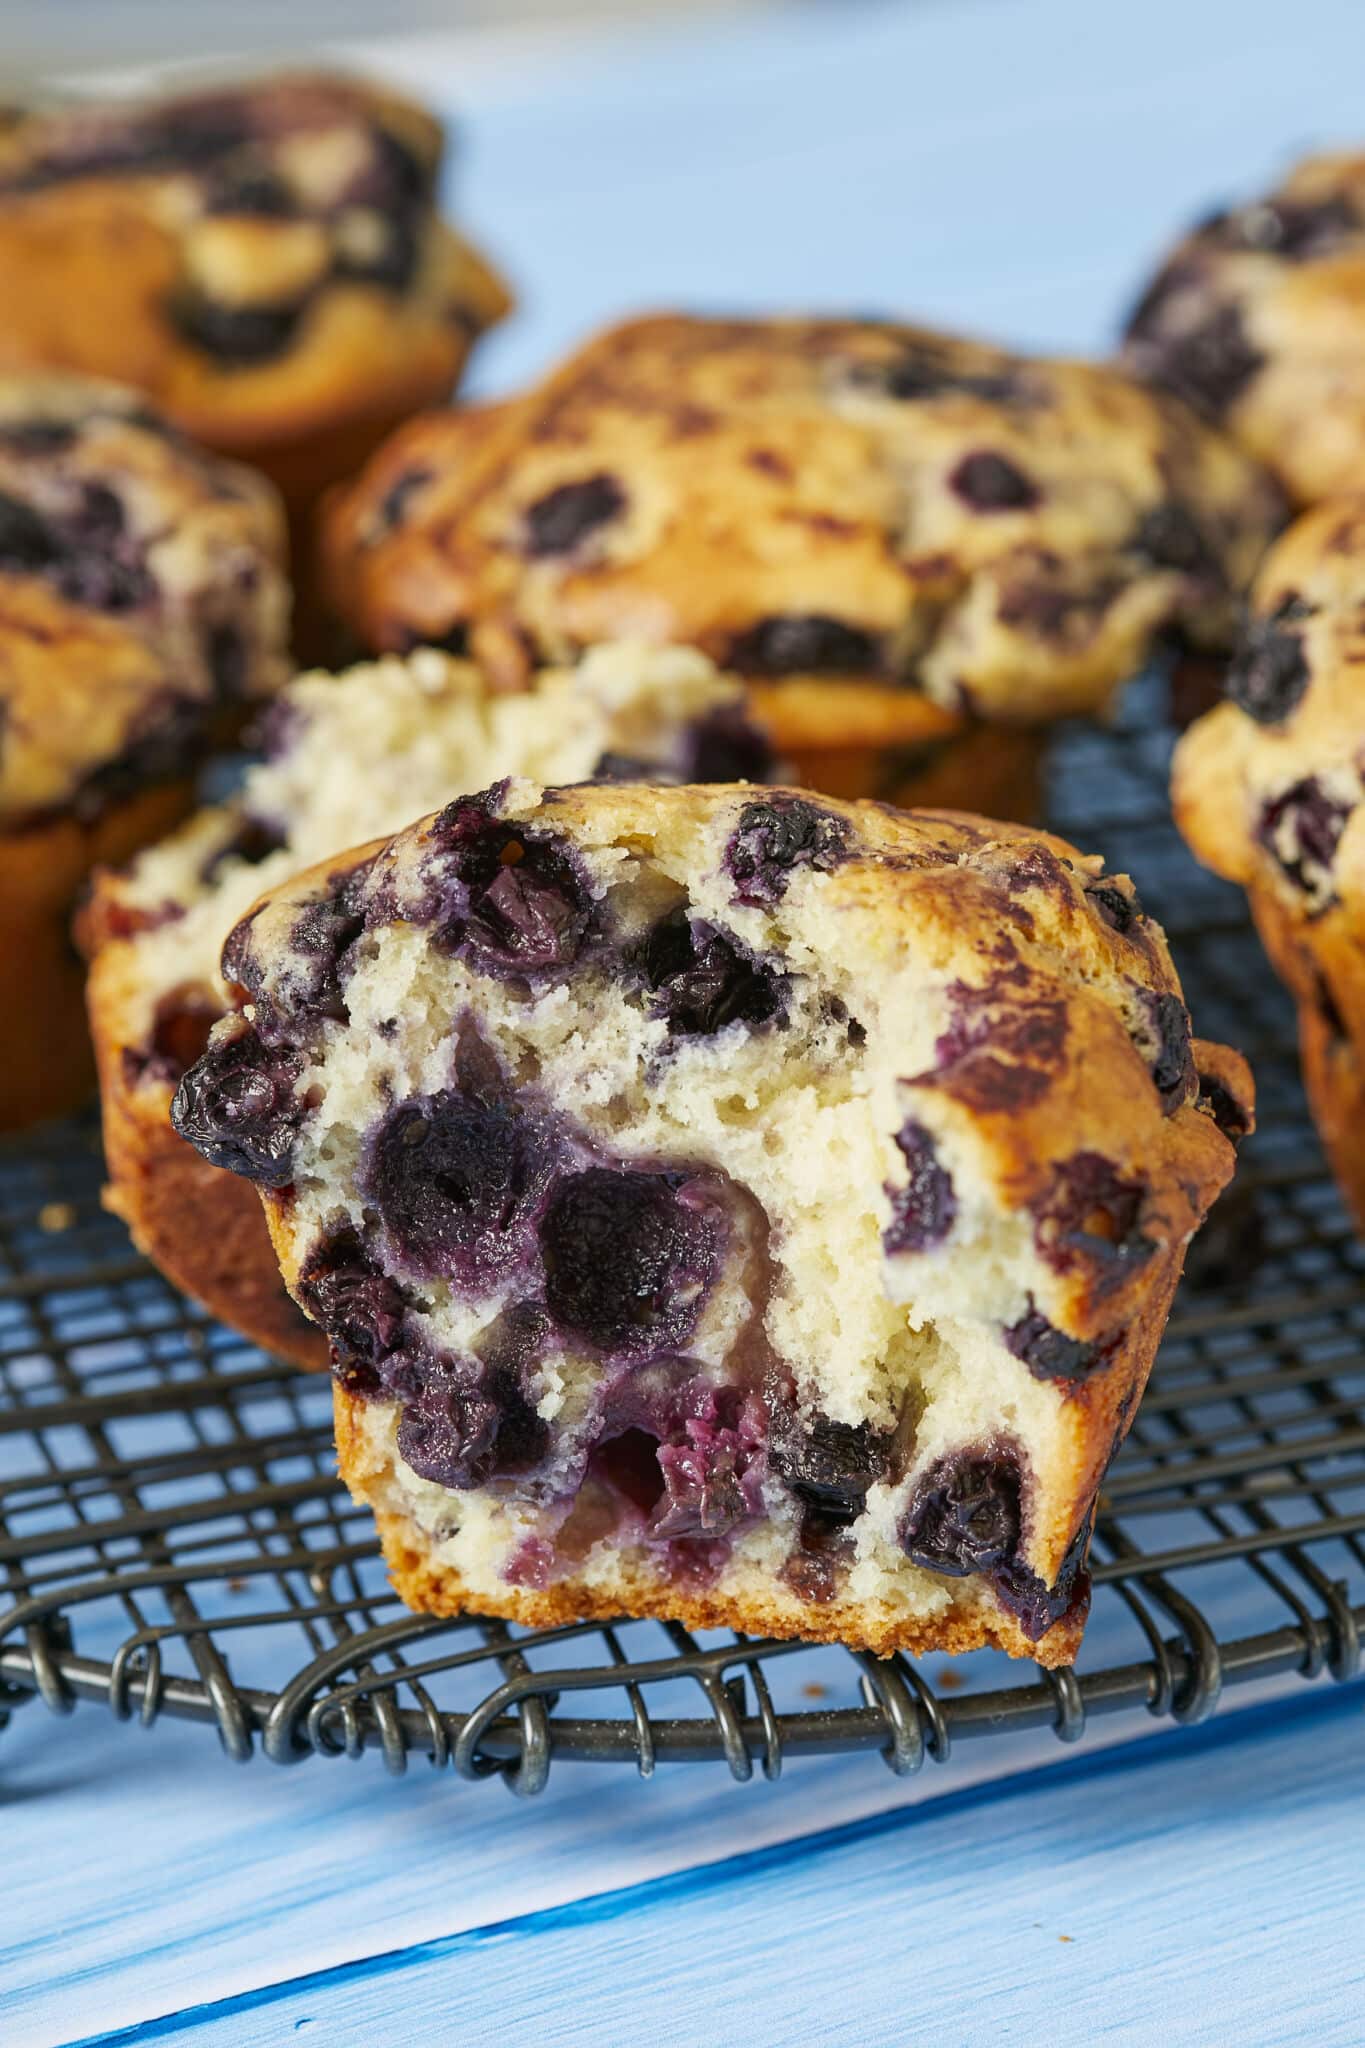 Half of a muffin in front loaded with juicy blueberries, showing the soft and bubbly tender inside. Other muffins are in the back.